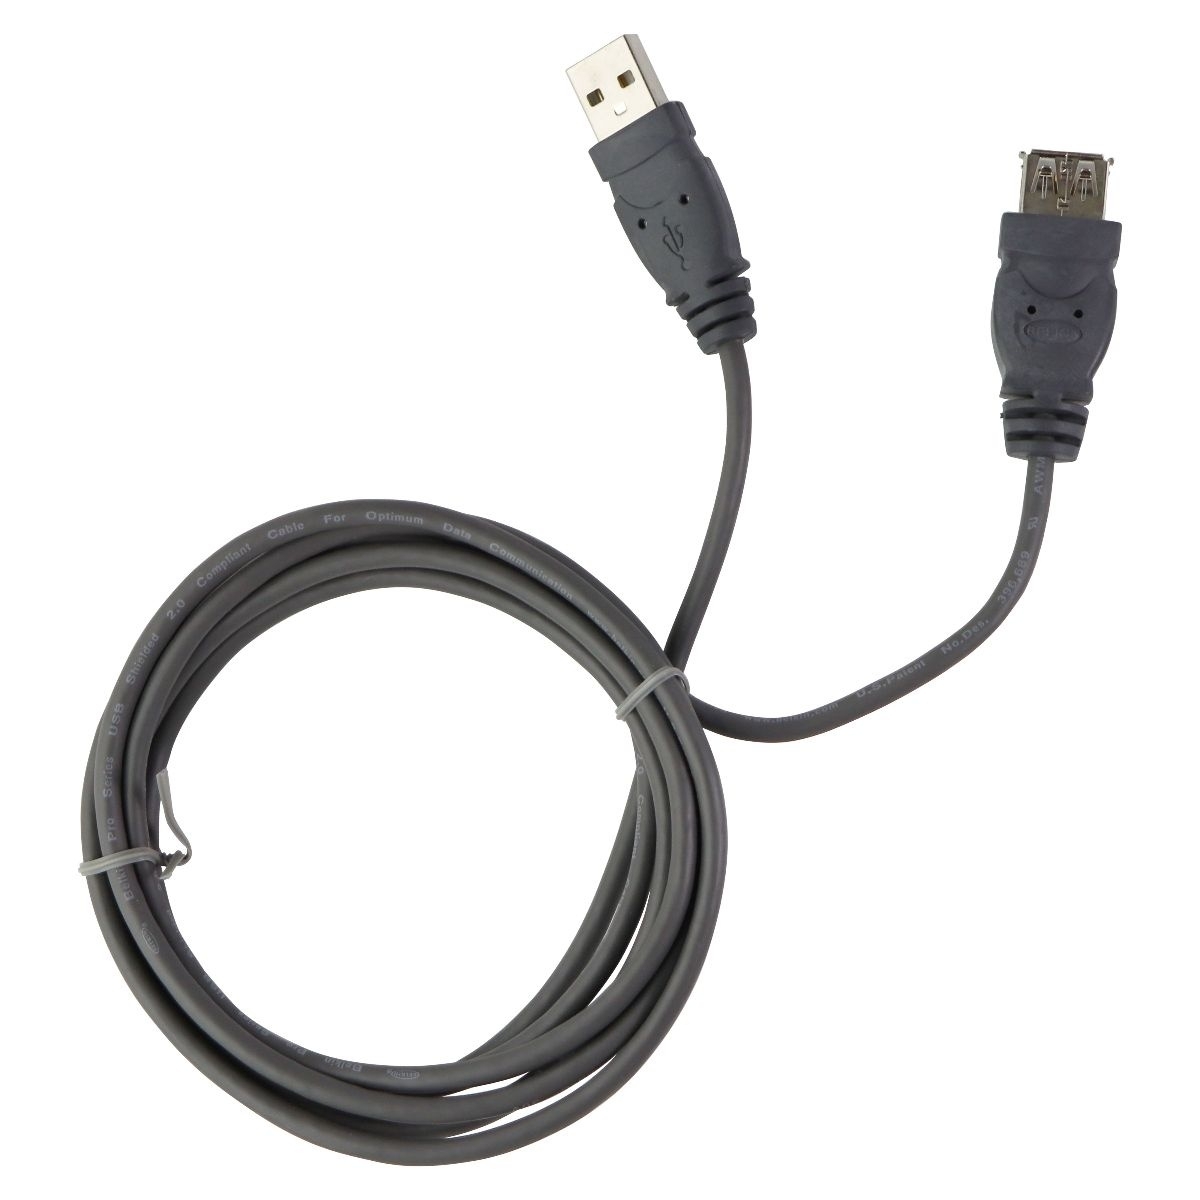 Belkin 6Ft Male USB (Type-A) to Female USB (Type-A) 1.0 Extension Cable - Gray